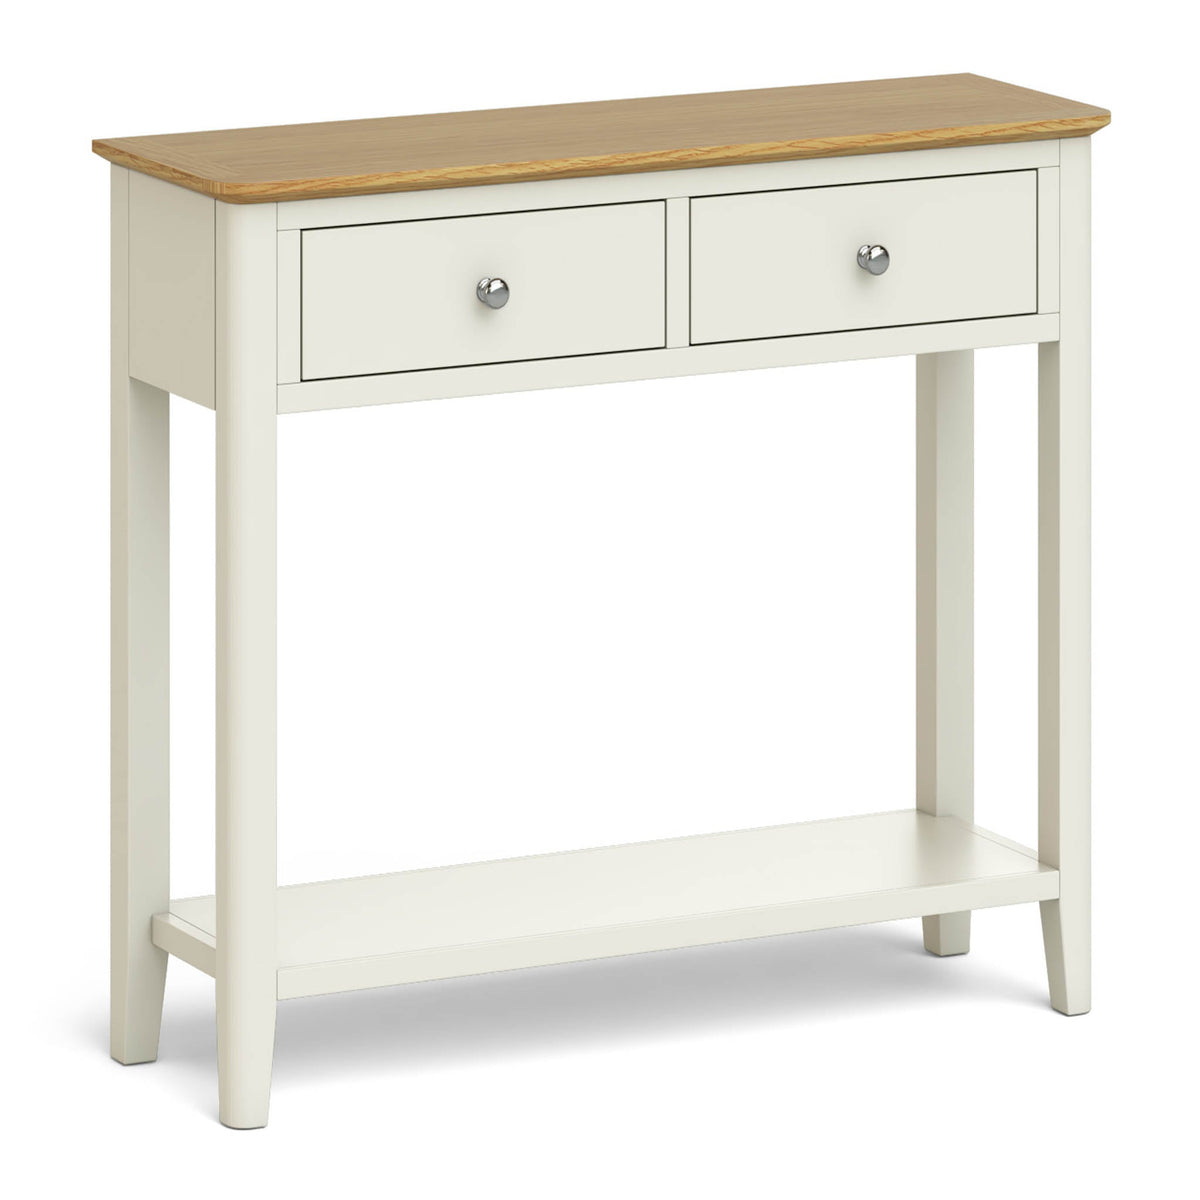 The Windsor Cream Painted Console Table with Storage Drawers from Roseland Furniture